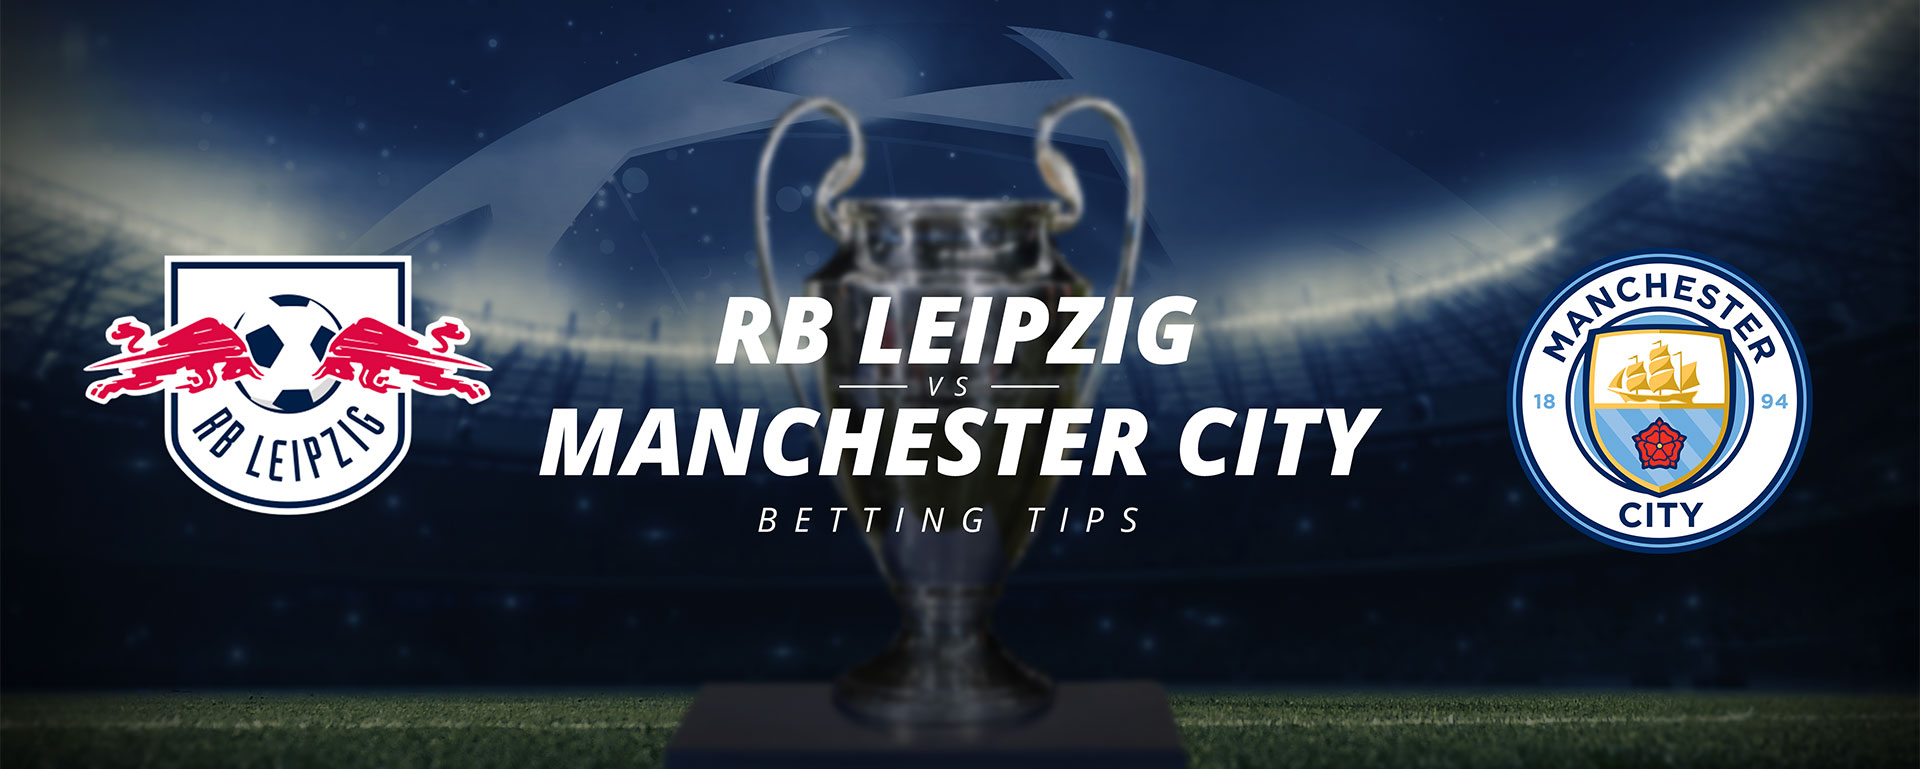 CHAMPIONS LEAGUE: RB LEIPZIG V MANCHESTER CITY